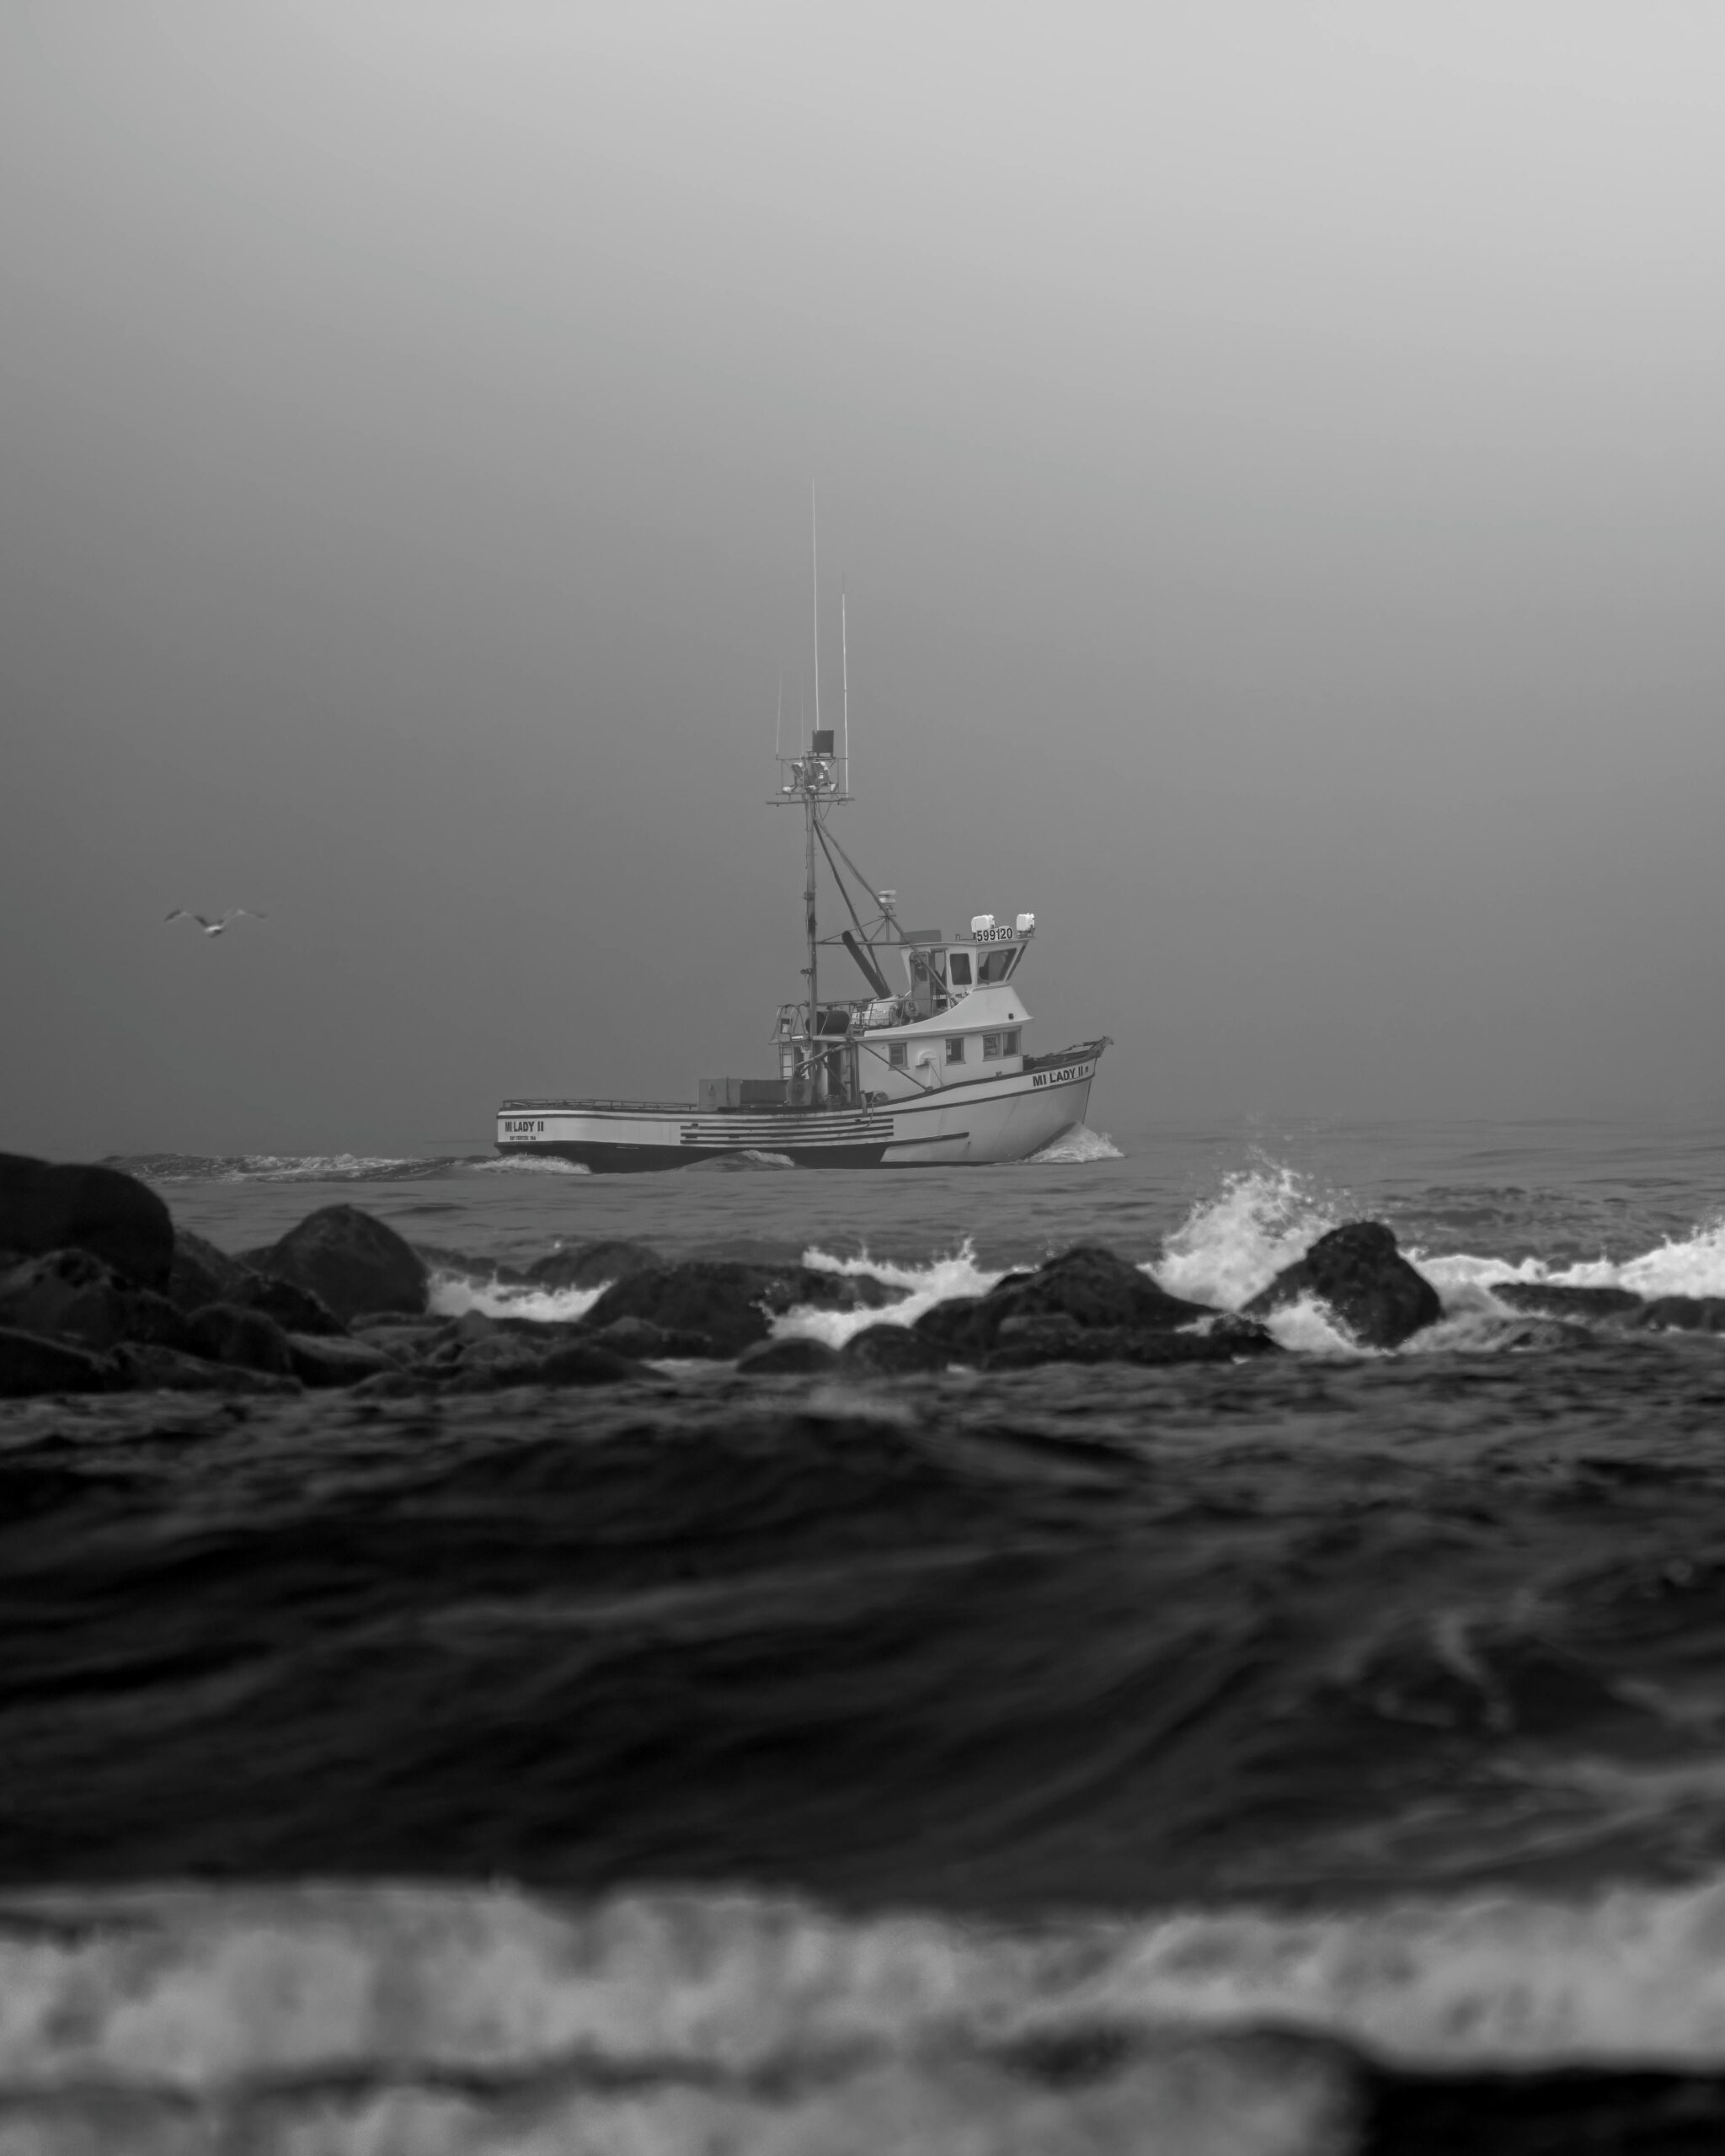 boating in a storm on rough waters